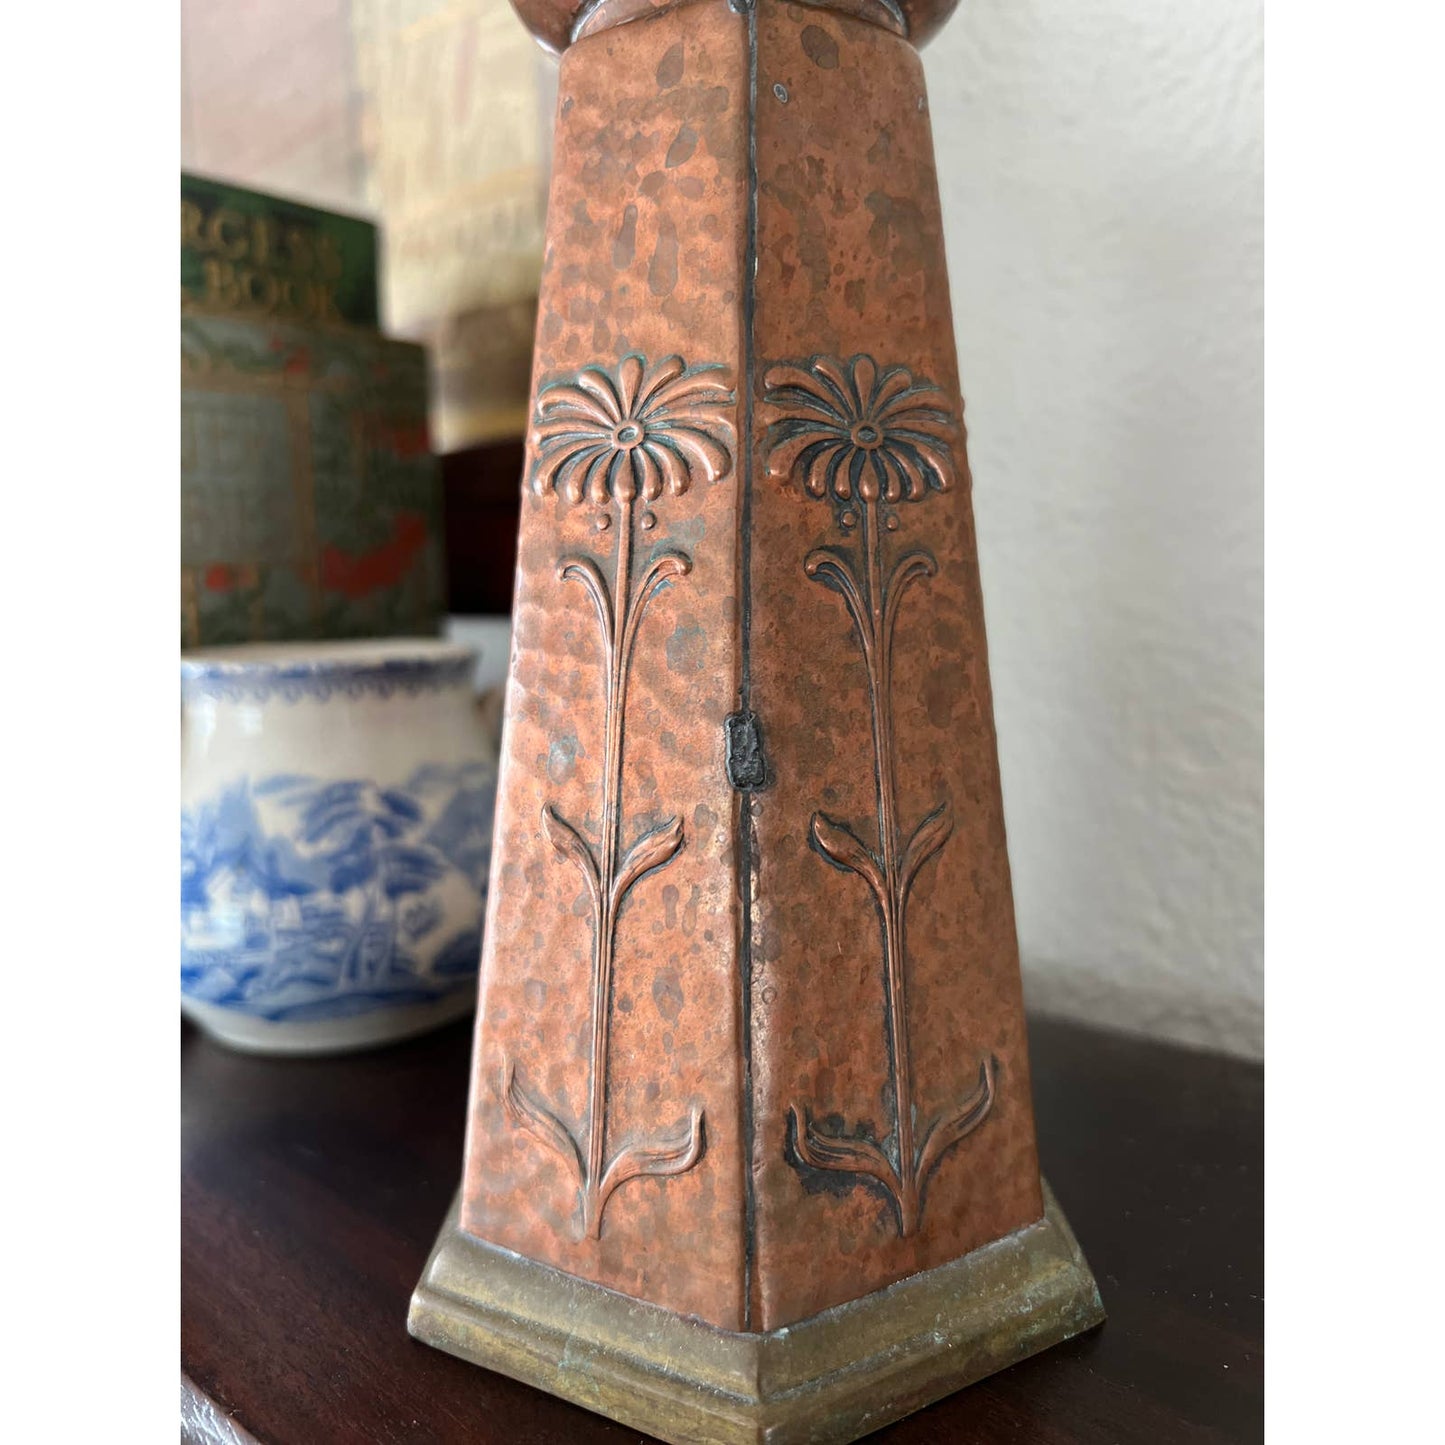 Arts and Crafts Period Hammered Copper Vase with Floral Motif